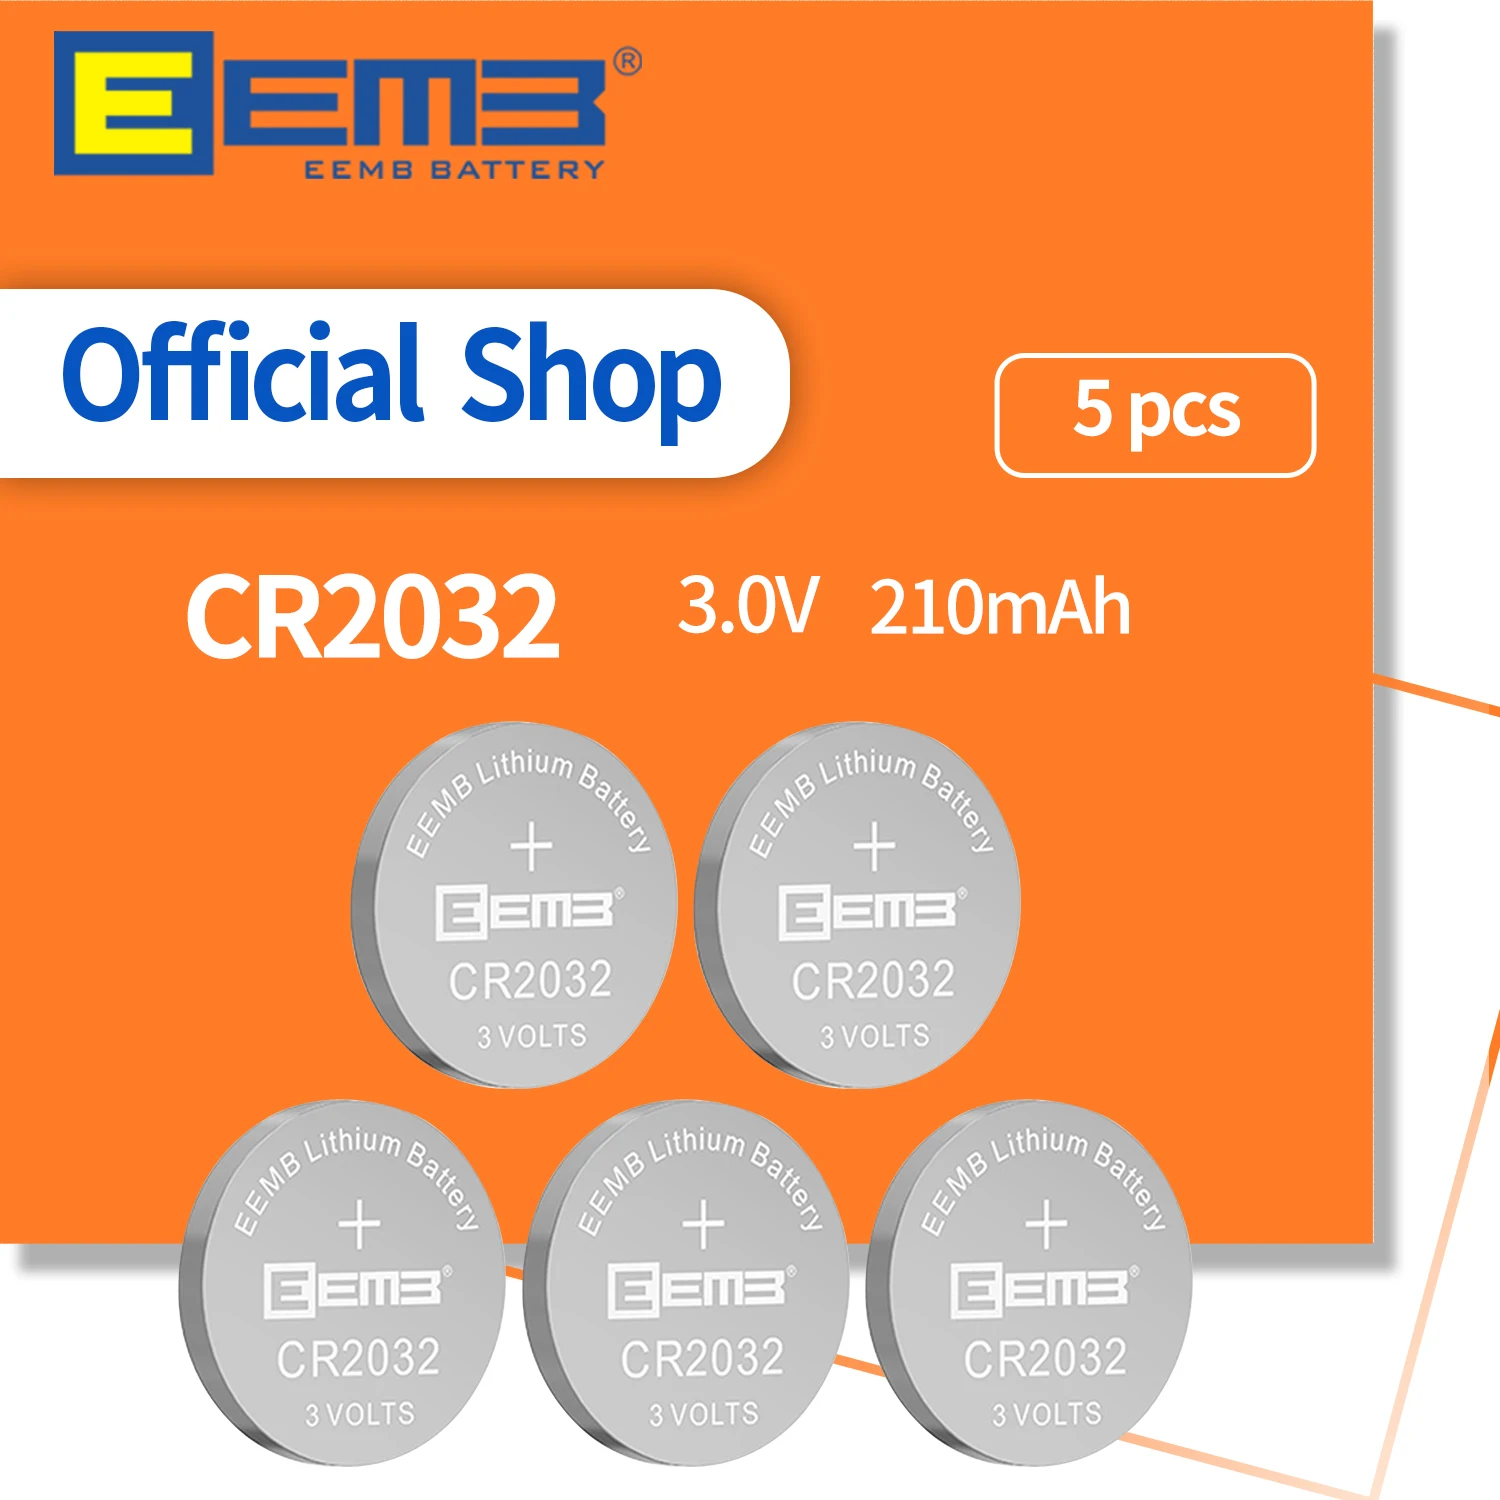 

EEMB 5PCS CR2032 Button Battery 3V Lithium Battery CR 2032 210mAh Coin Cell Batteries for Watch Toys Car Key Pedometer Scales